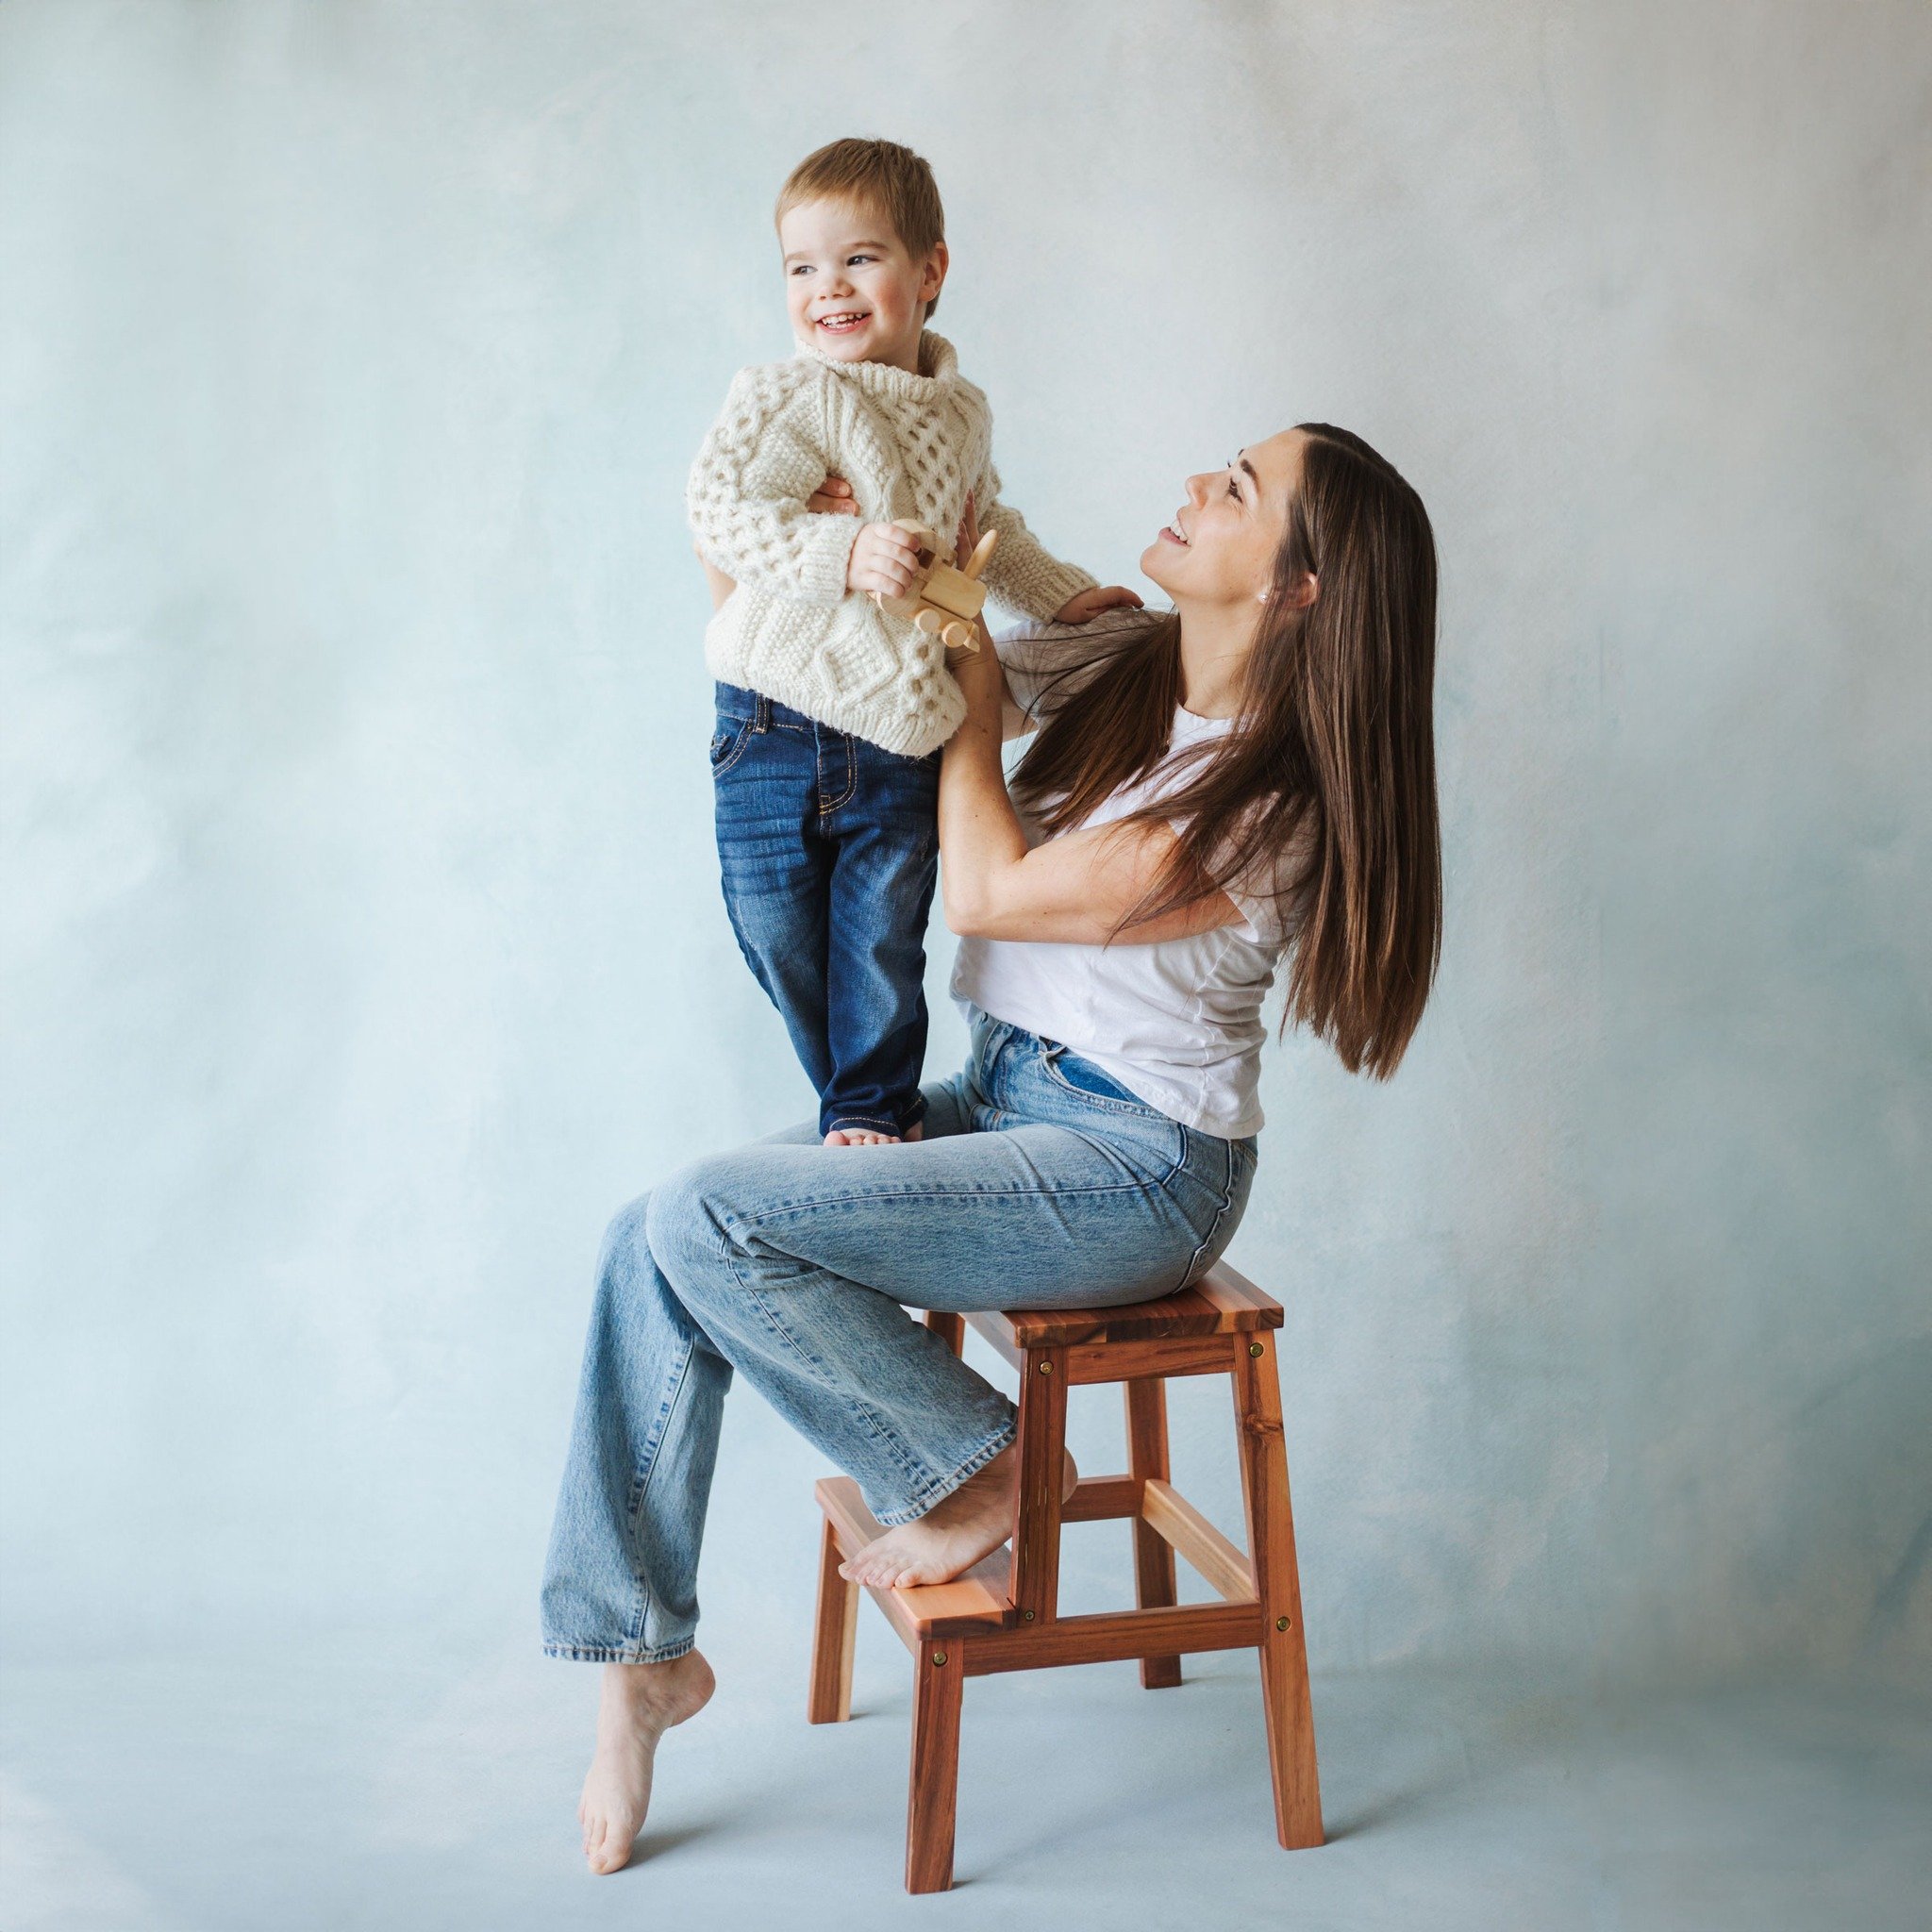 Simple portraits are sometimes the best way to show the beautiful bond between a mom and her child. Whether it's the gentle touch of a mother's hand, the laughter shared with her children, or the quiet moments of tenderness, I'm here to beautifully p